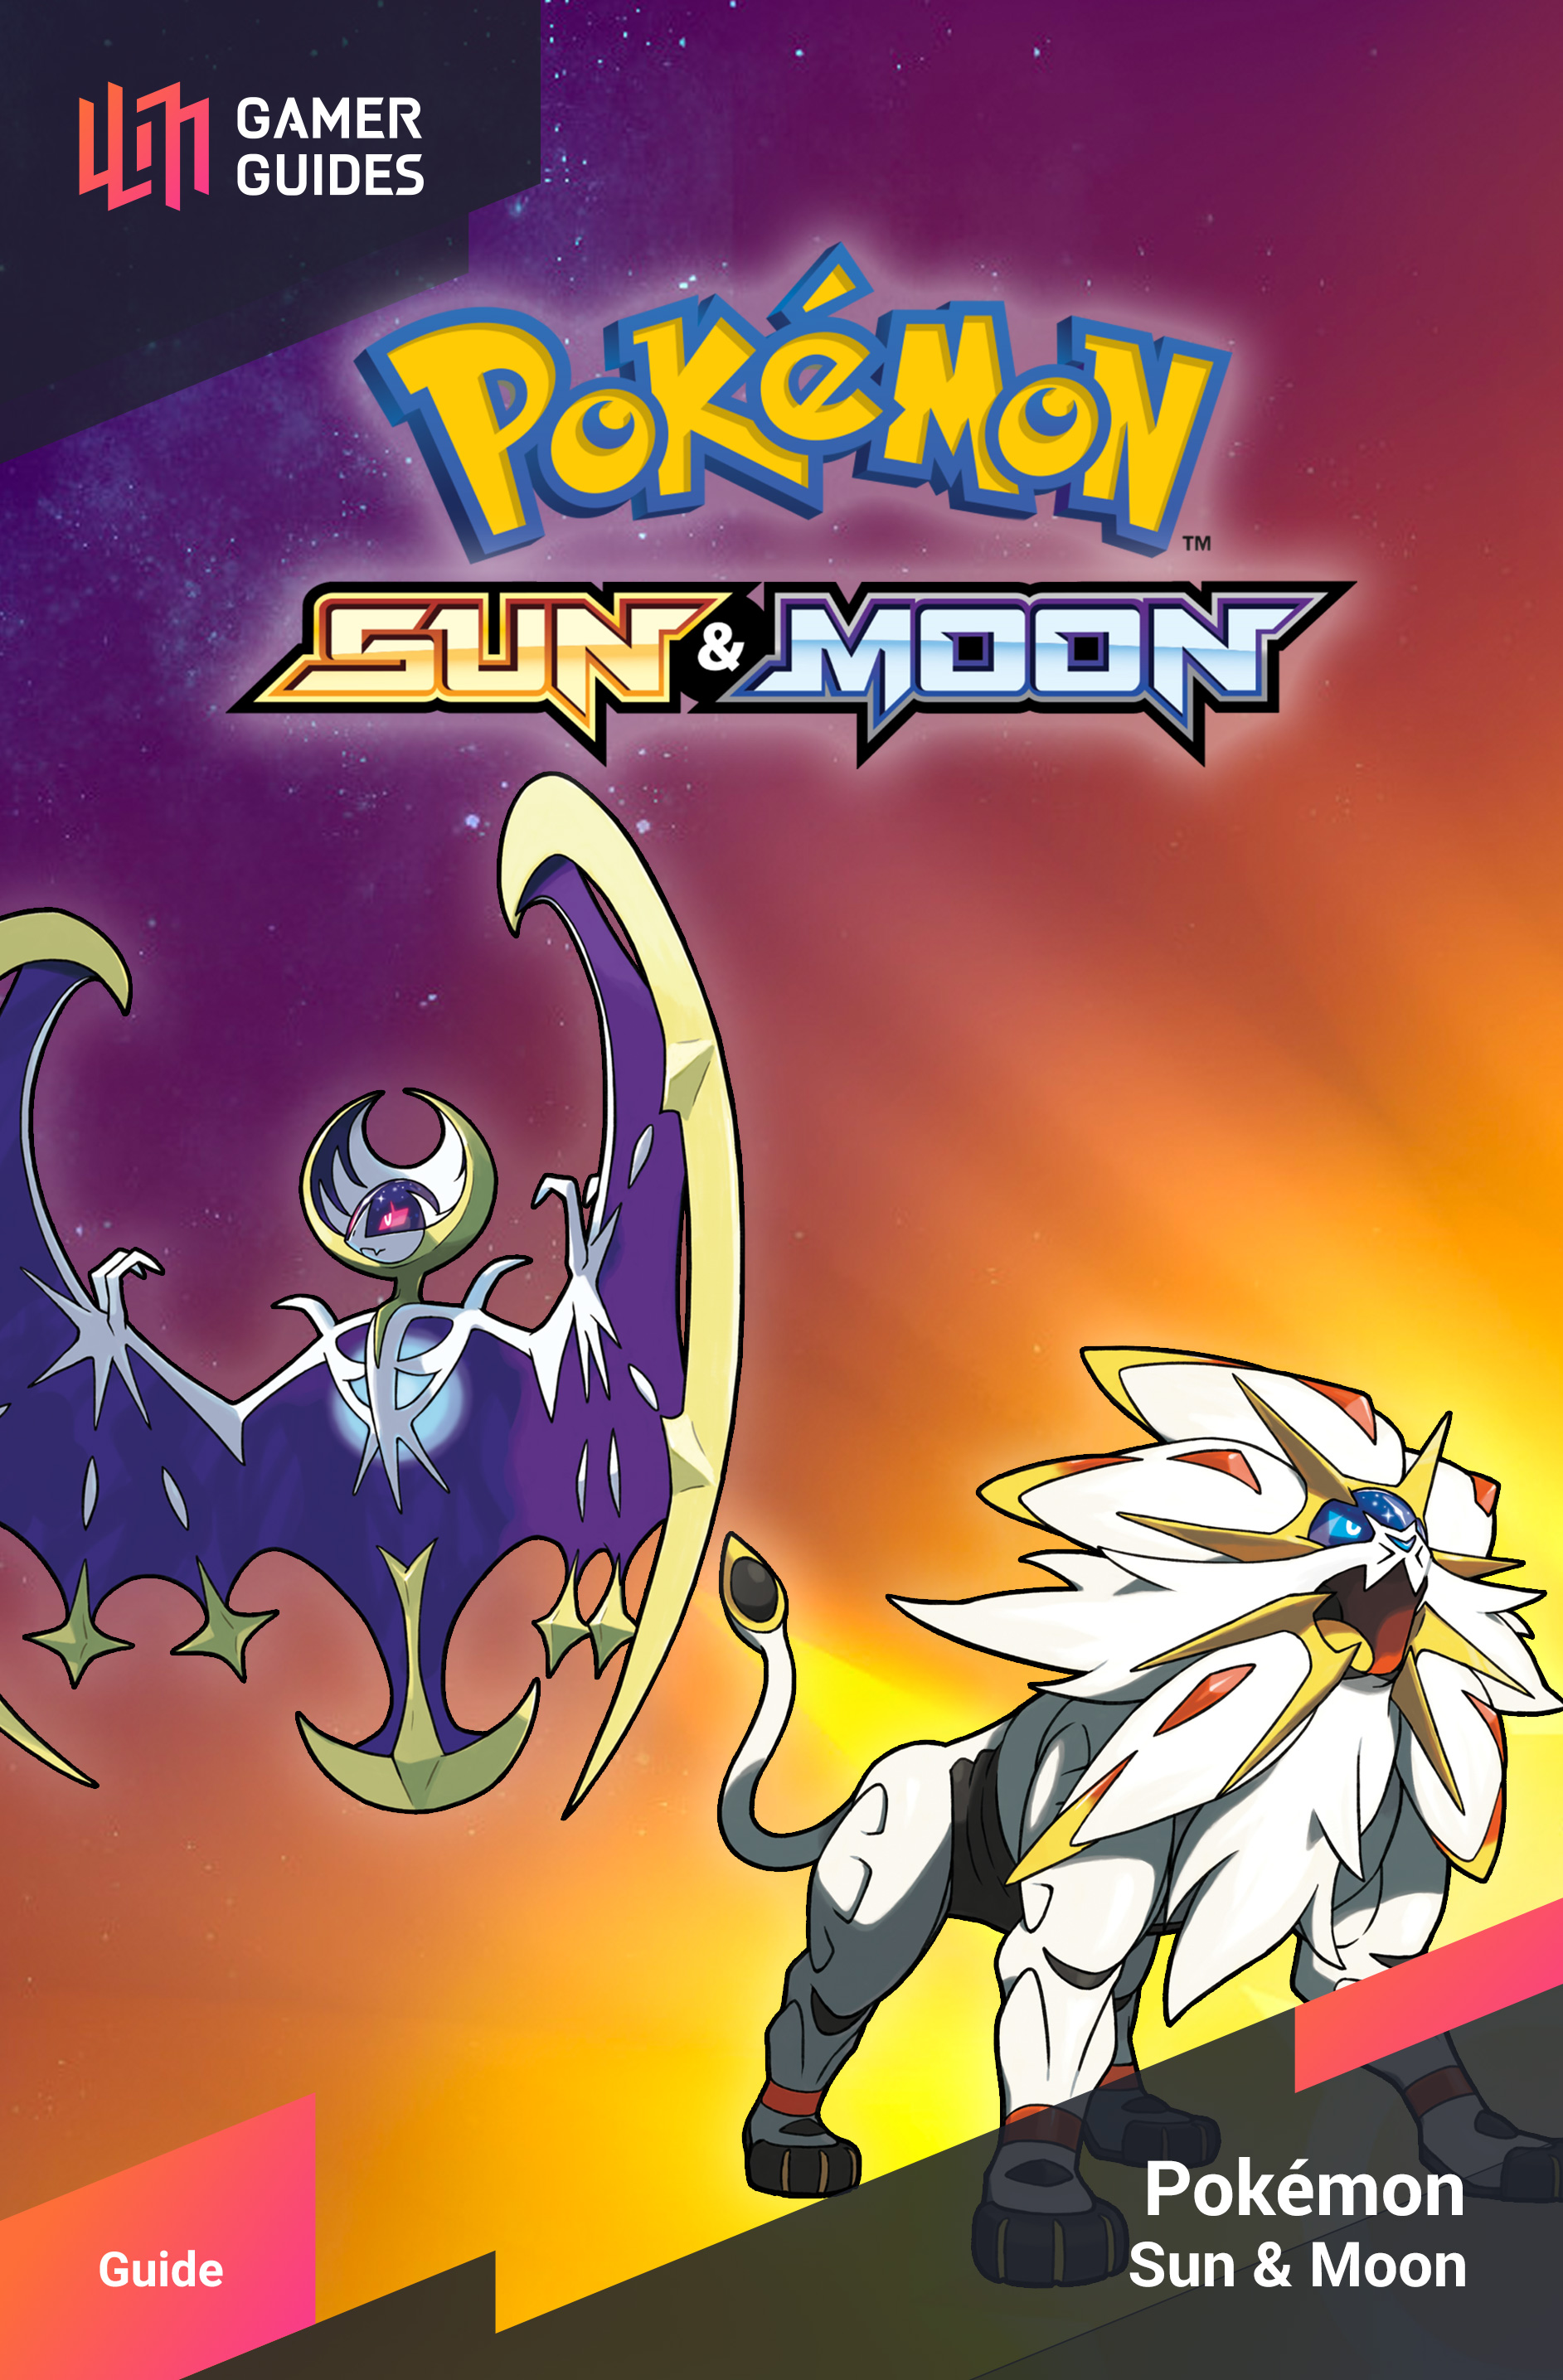 foreword-introduction-intro-and-gameplay-pok-mon-sun-moon-gamer-guides